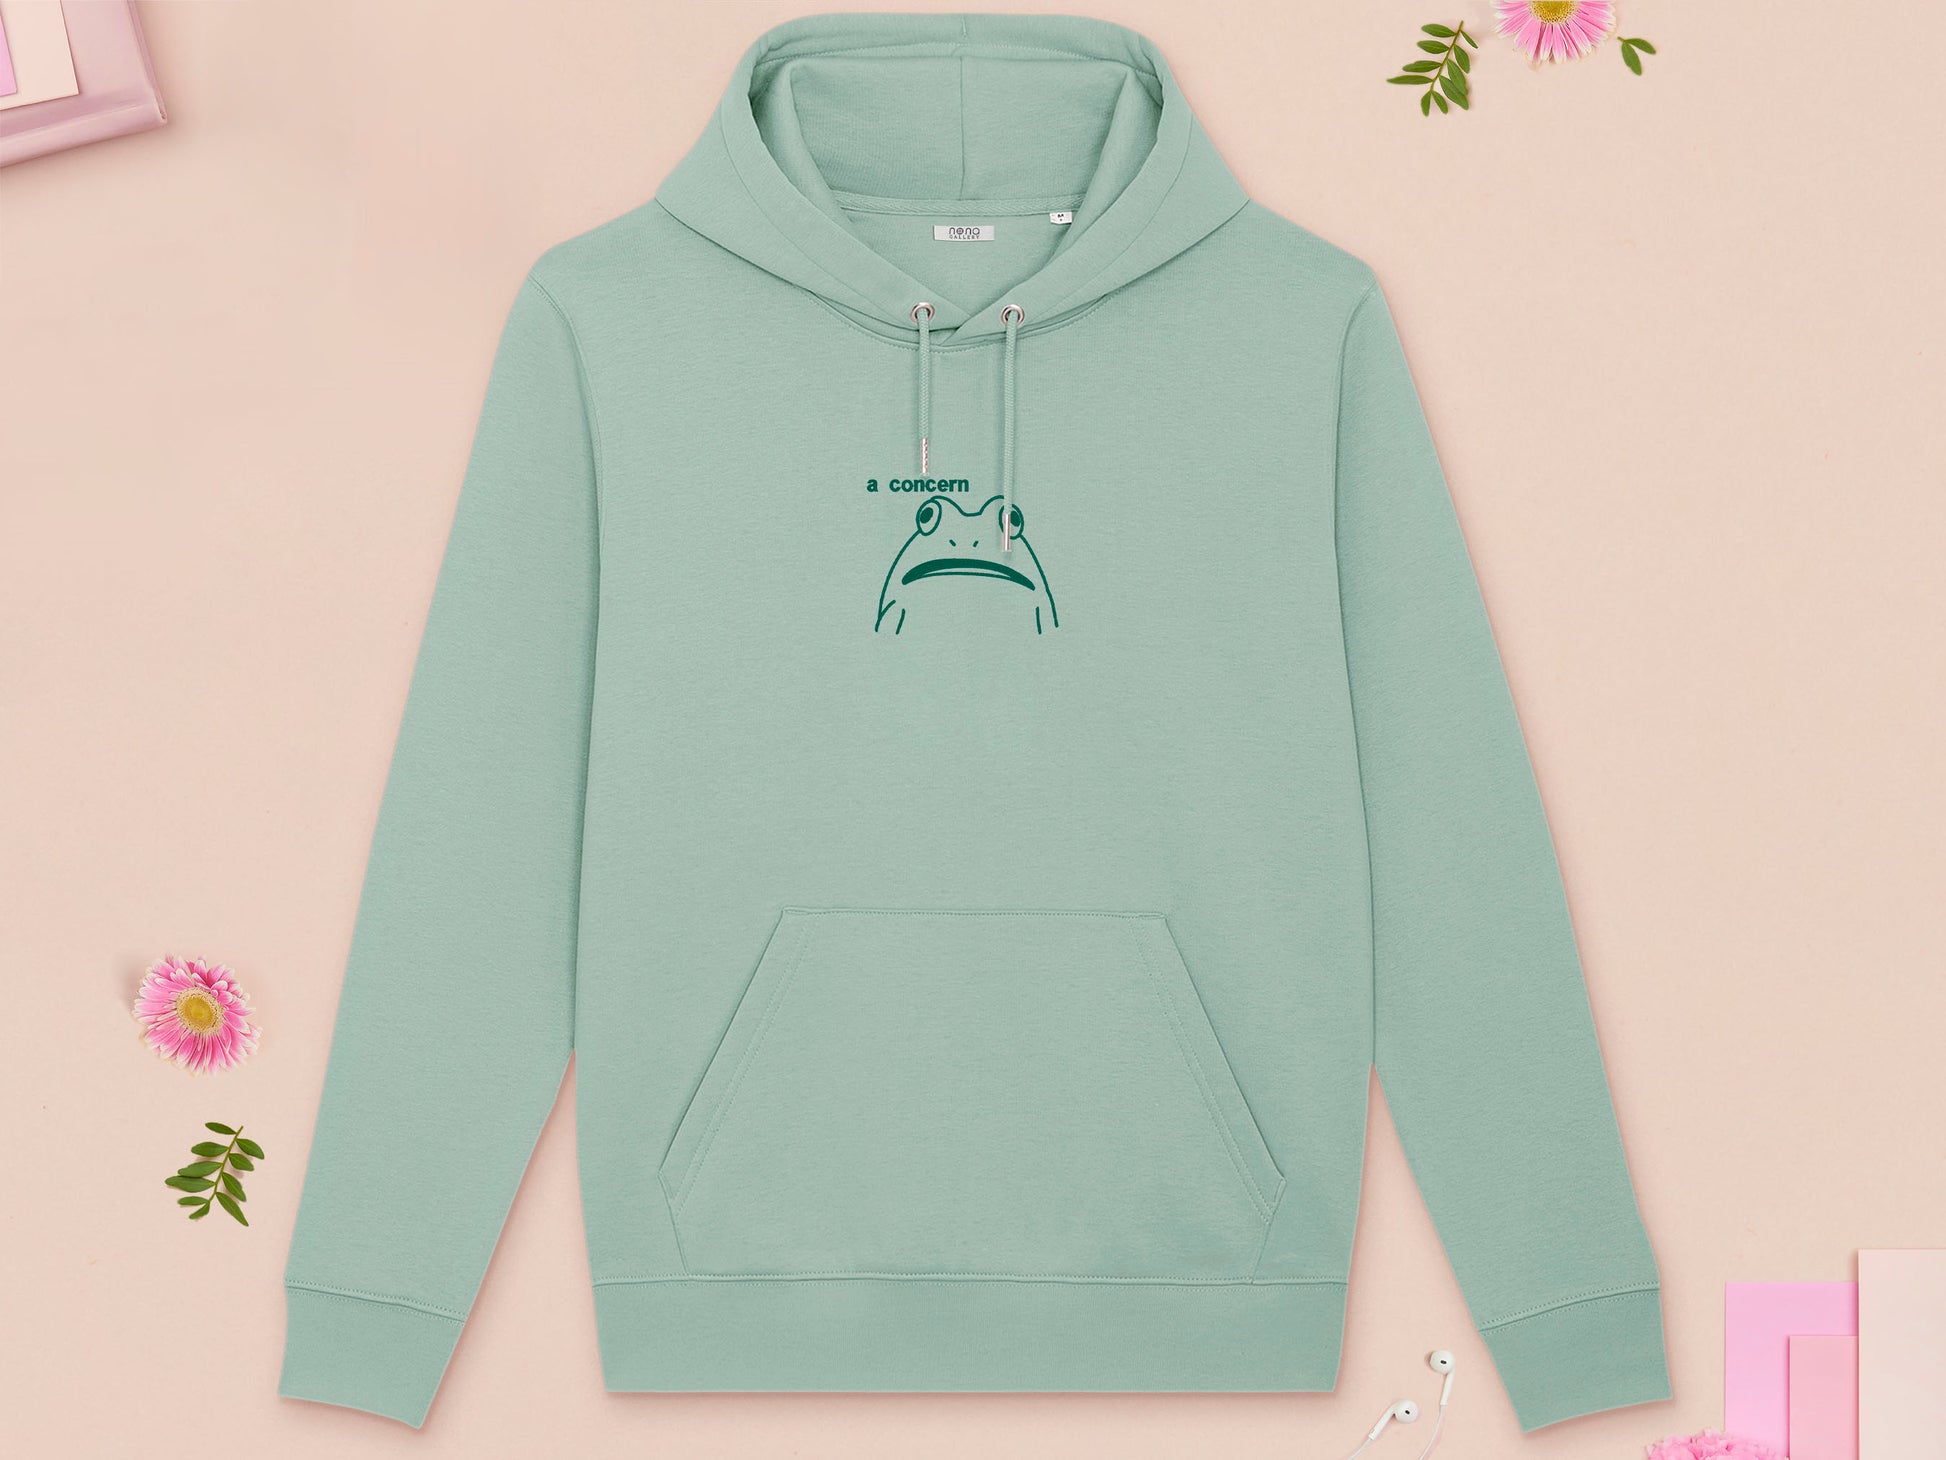 A green long sleeve fleece hoodie, with an embroidered brown thread design of cute confused looking frog with the text a concern.